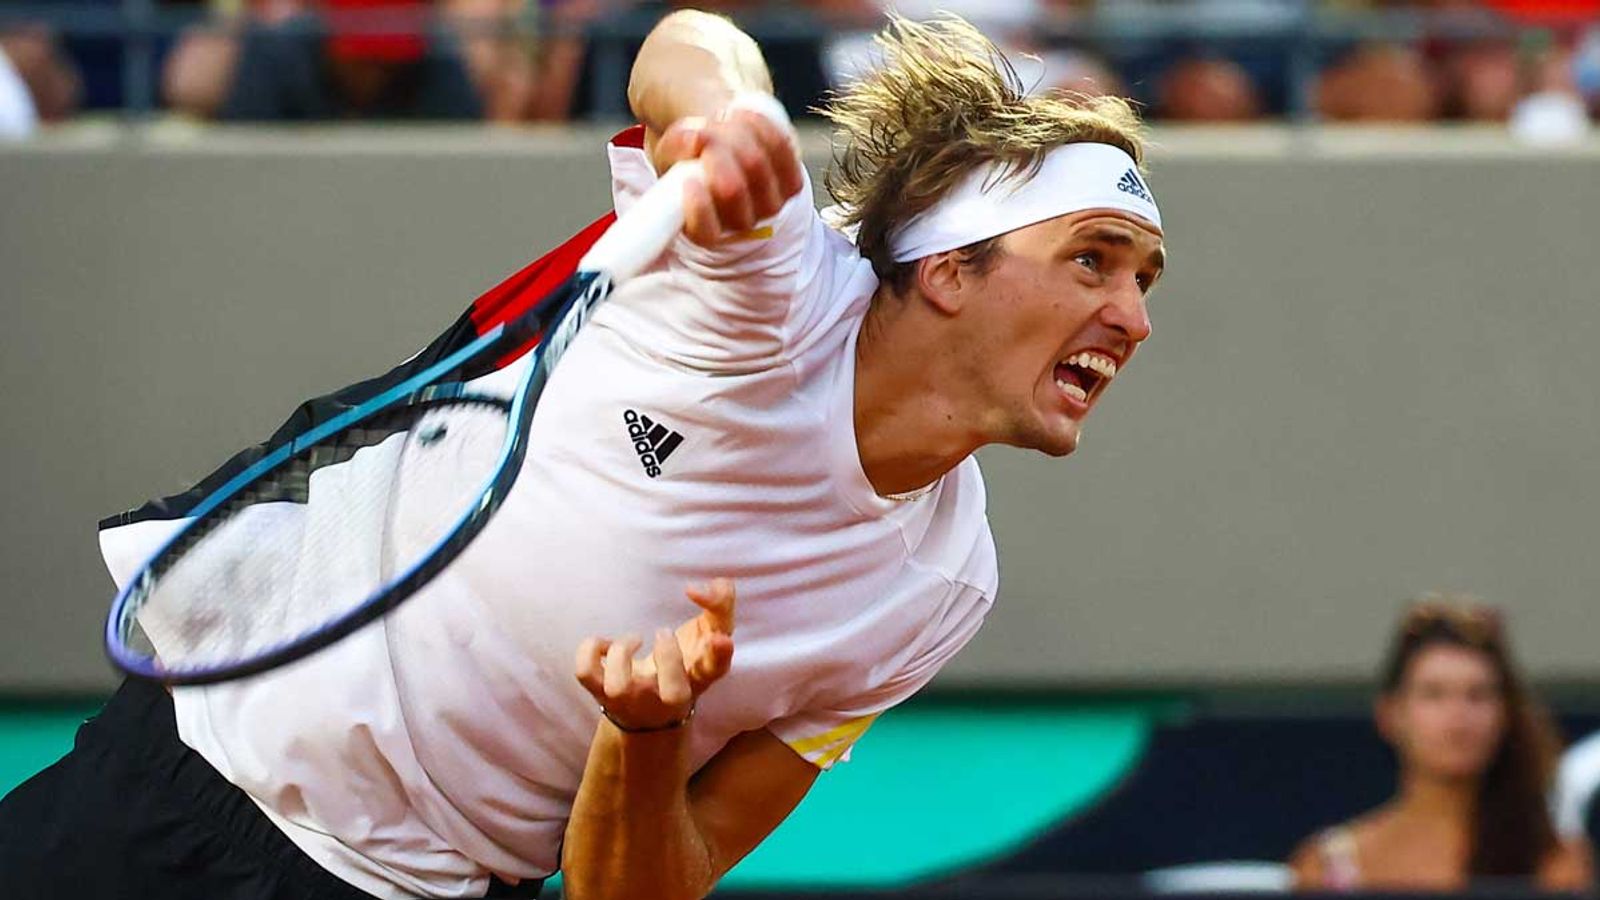 Tennis news: Zverev and company serve at the Davis Cup in Hamburg |  tennis news